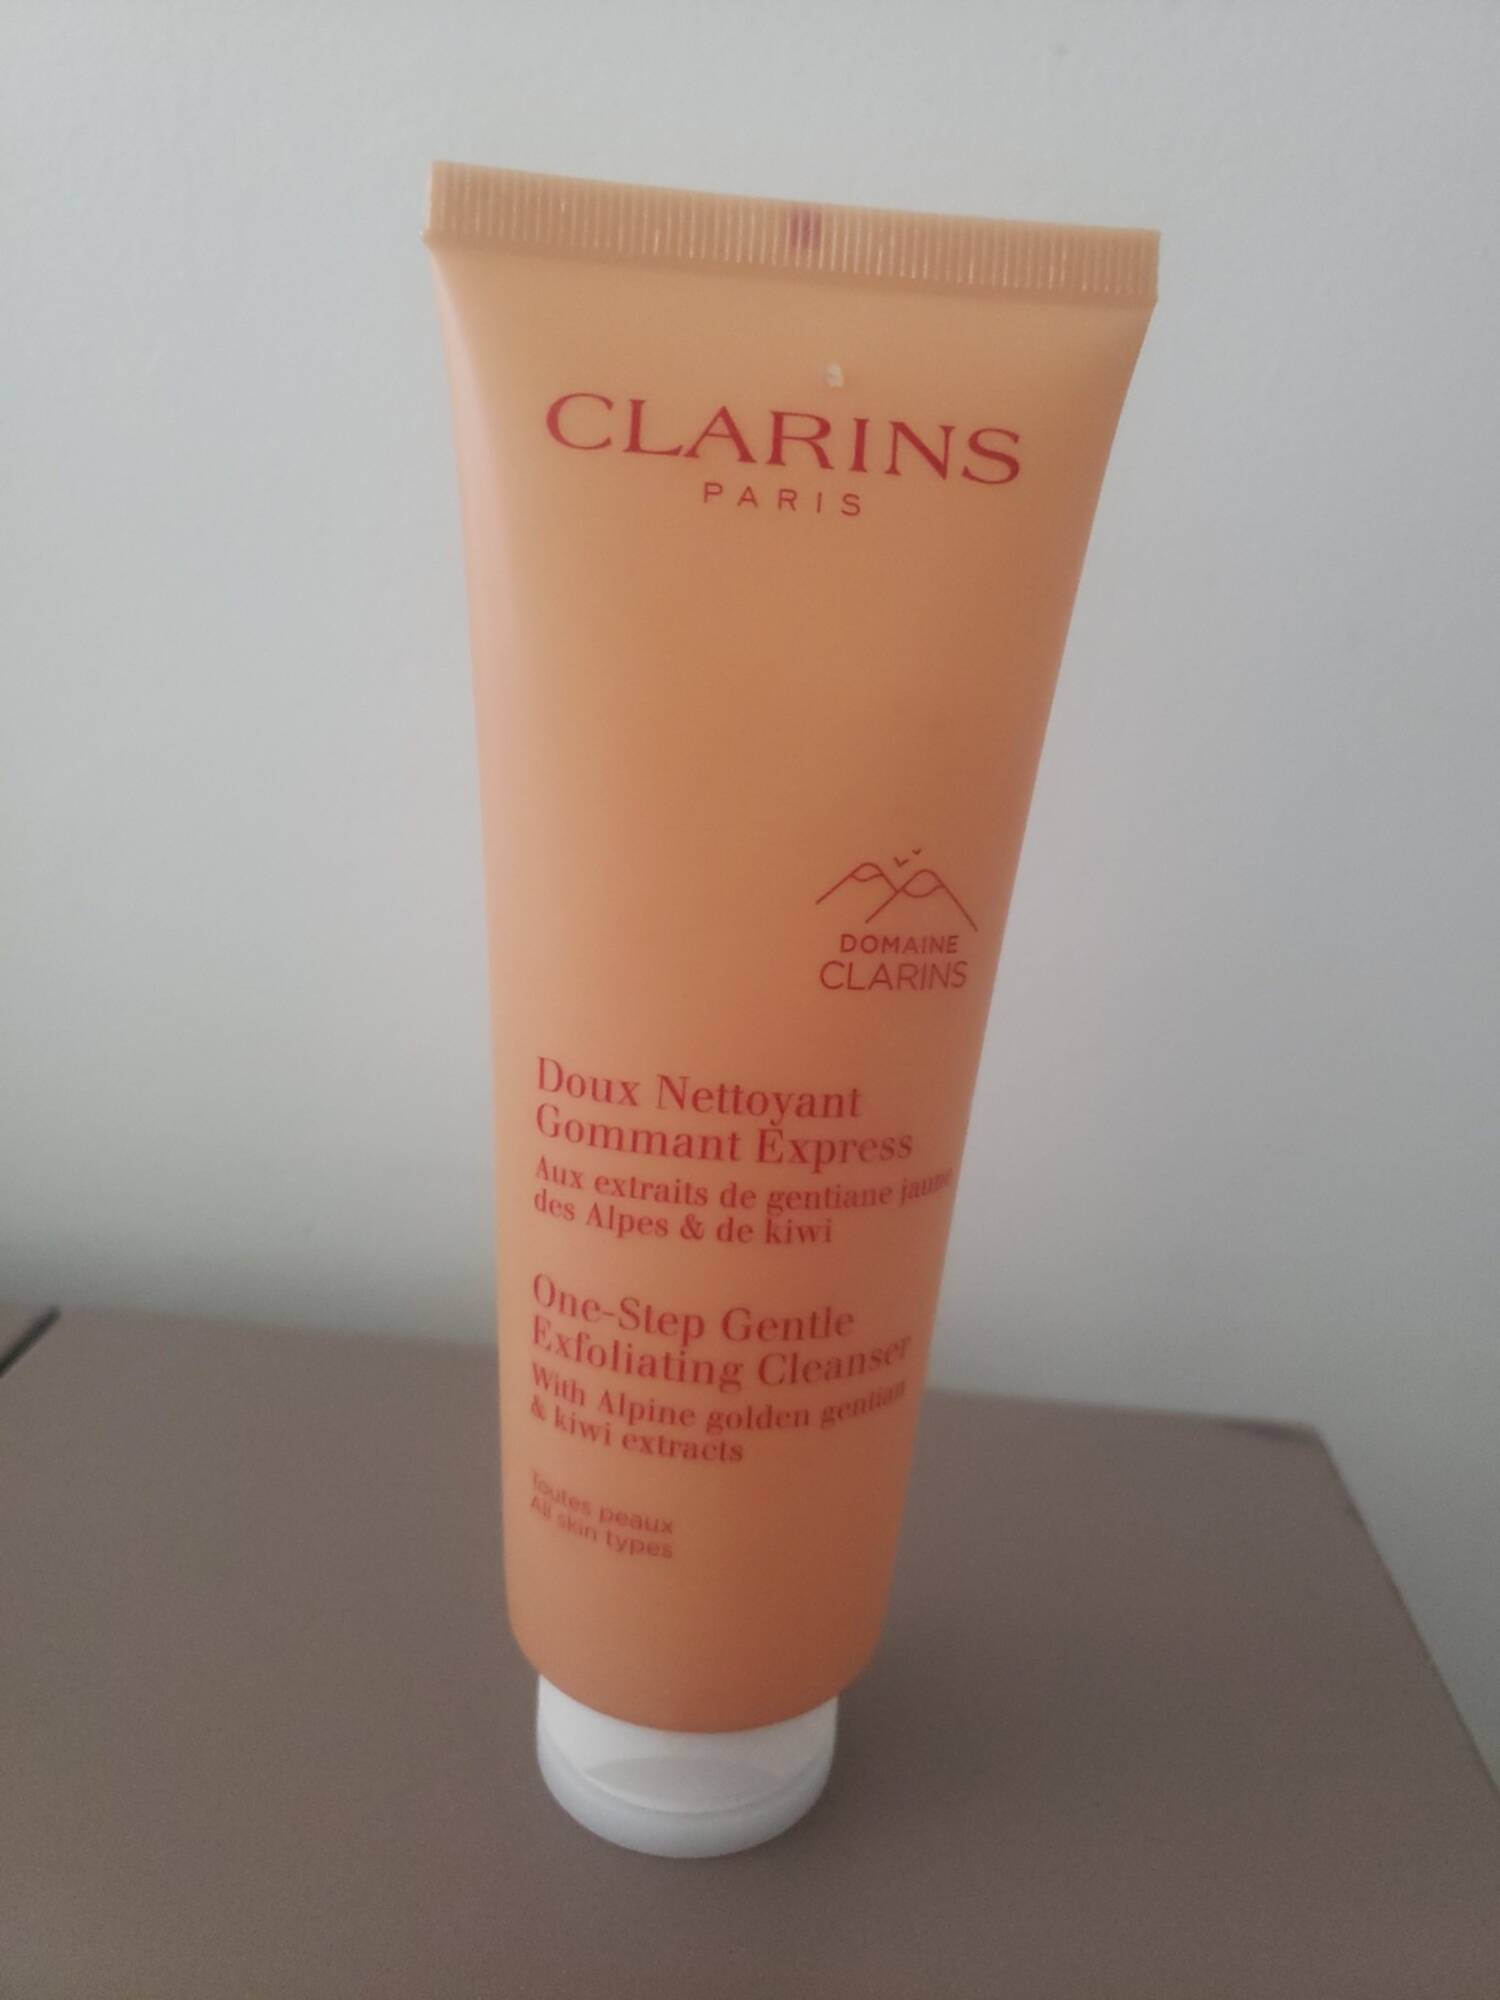 CLARINS - Doux nettoyant gommant express